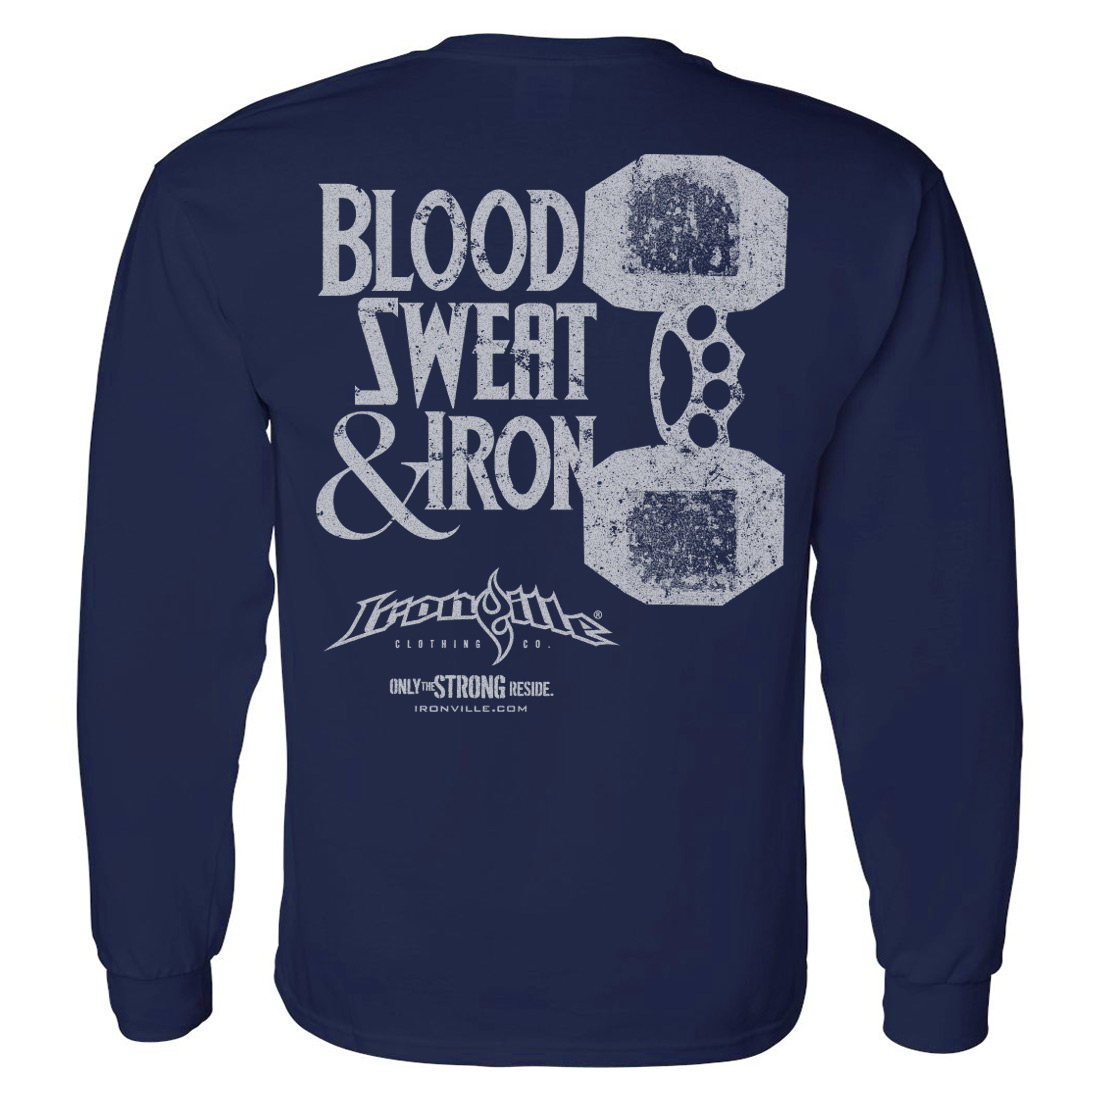 Blood Sweat & Iron Brass Dumbbell Weightlifting Long Sleeve T- Shirt | Ironville Clothing